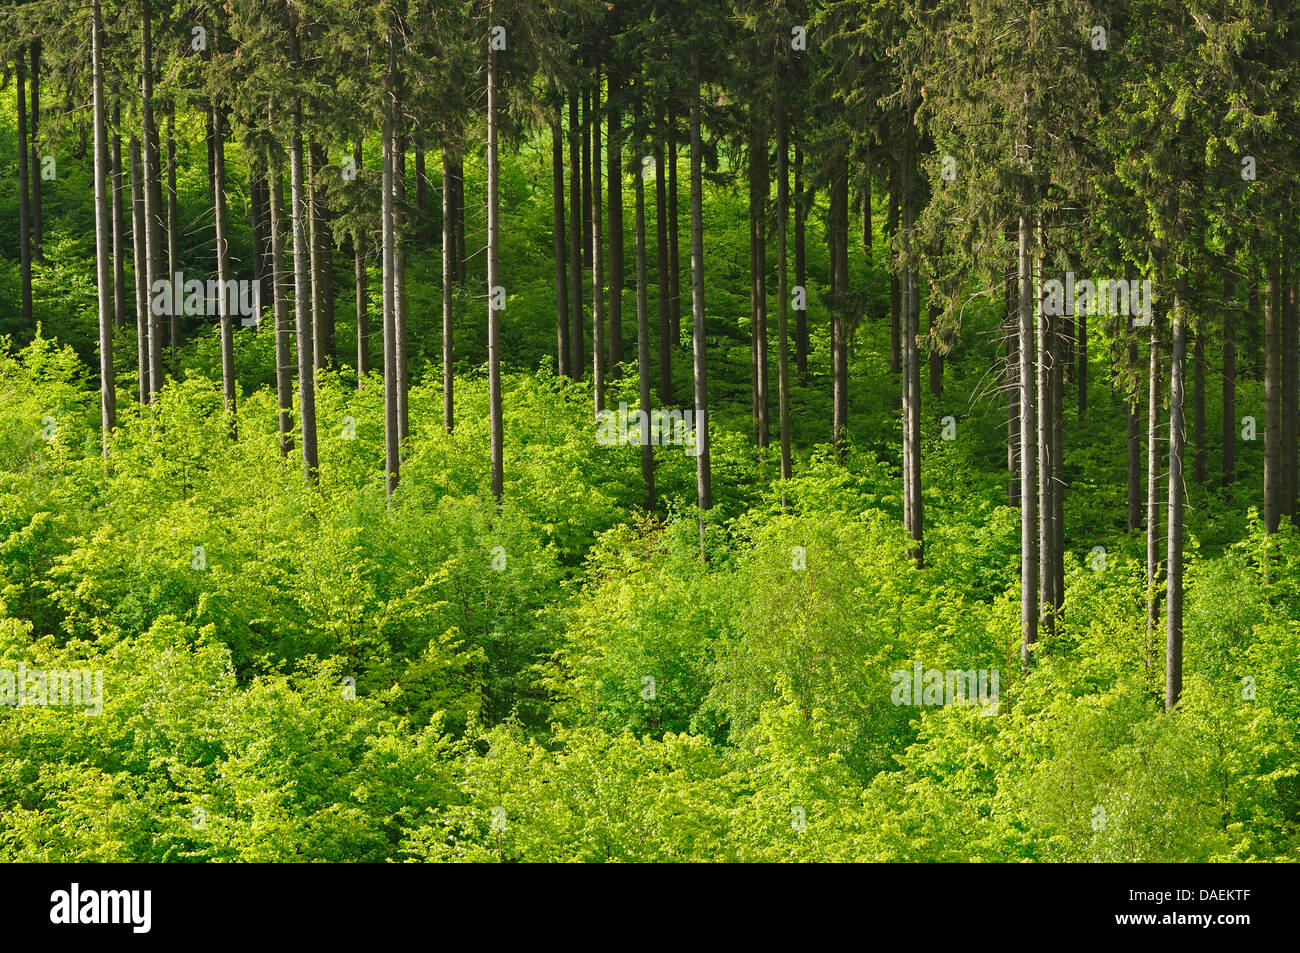 Norway spruce (Picea abies), conifer forest with young decidous trees, Germany Stock Photo